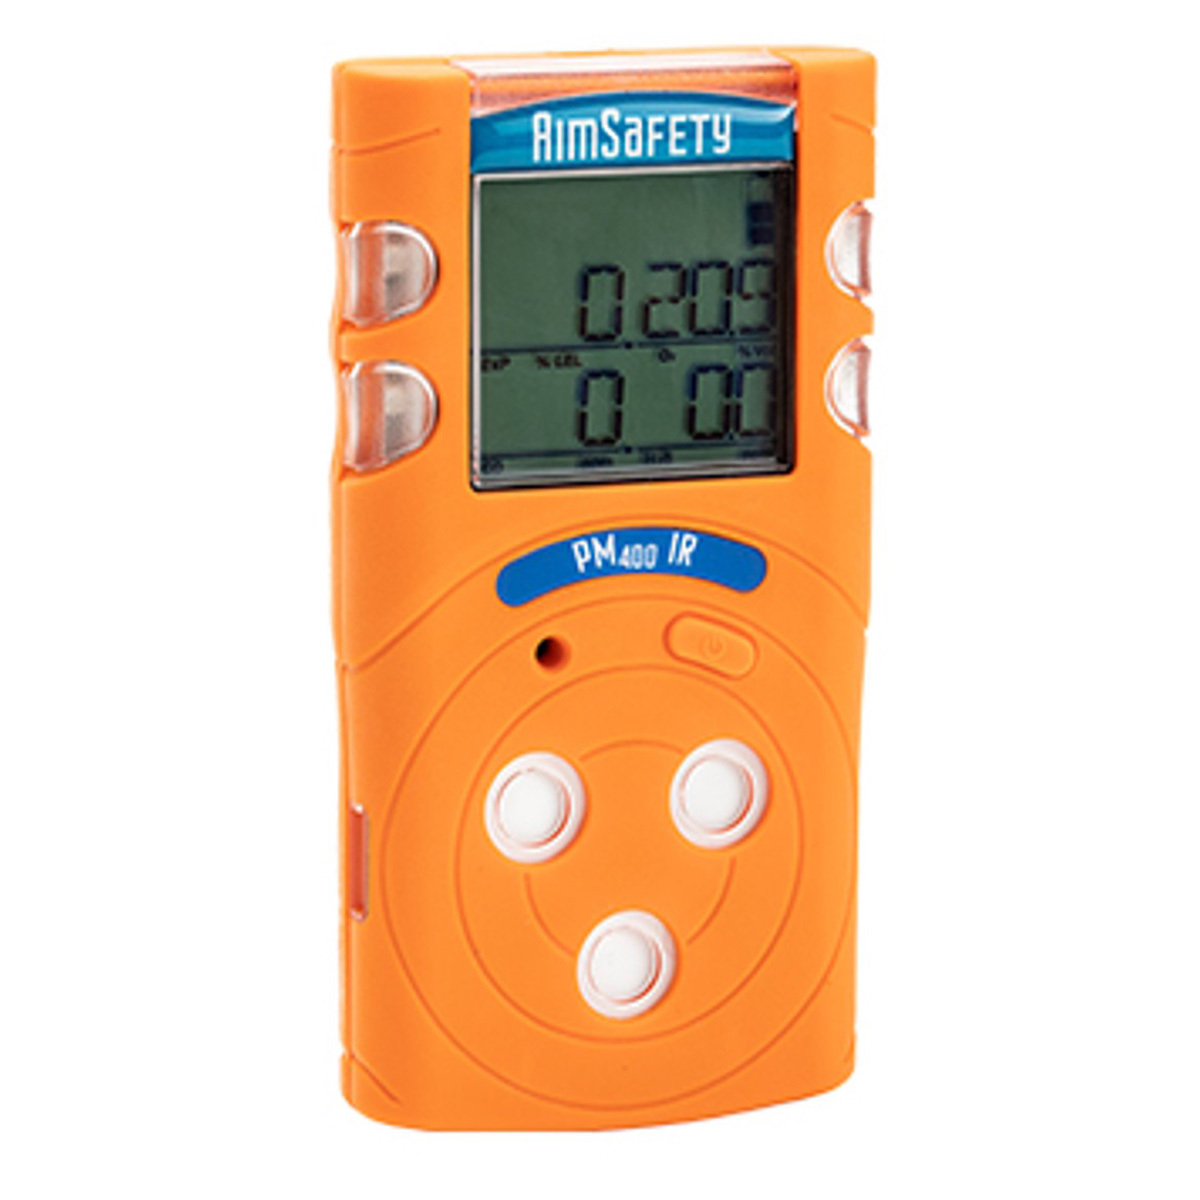 Macurco™ AimSafety PM400-IR Portable Oxygen, Hydrogen Sulfide, Carbon Monoxide And Combustible Gas Detector